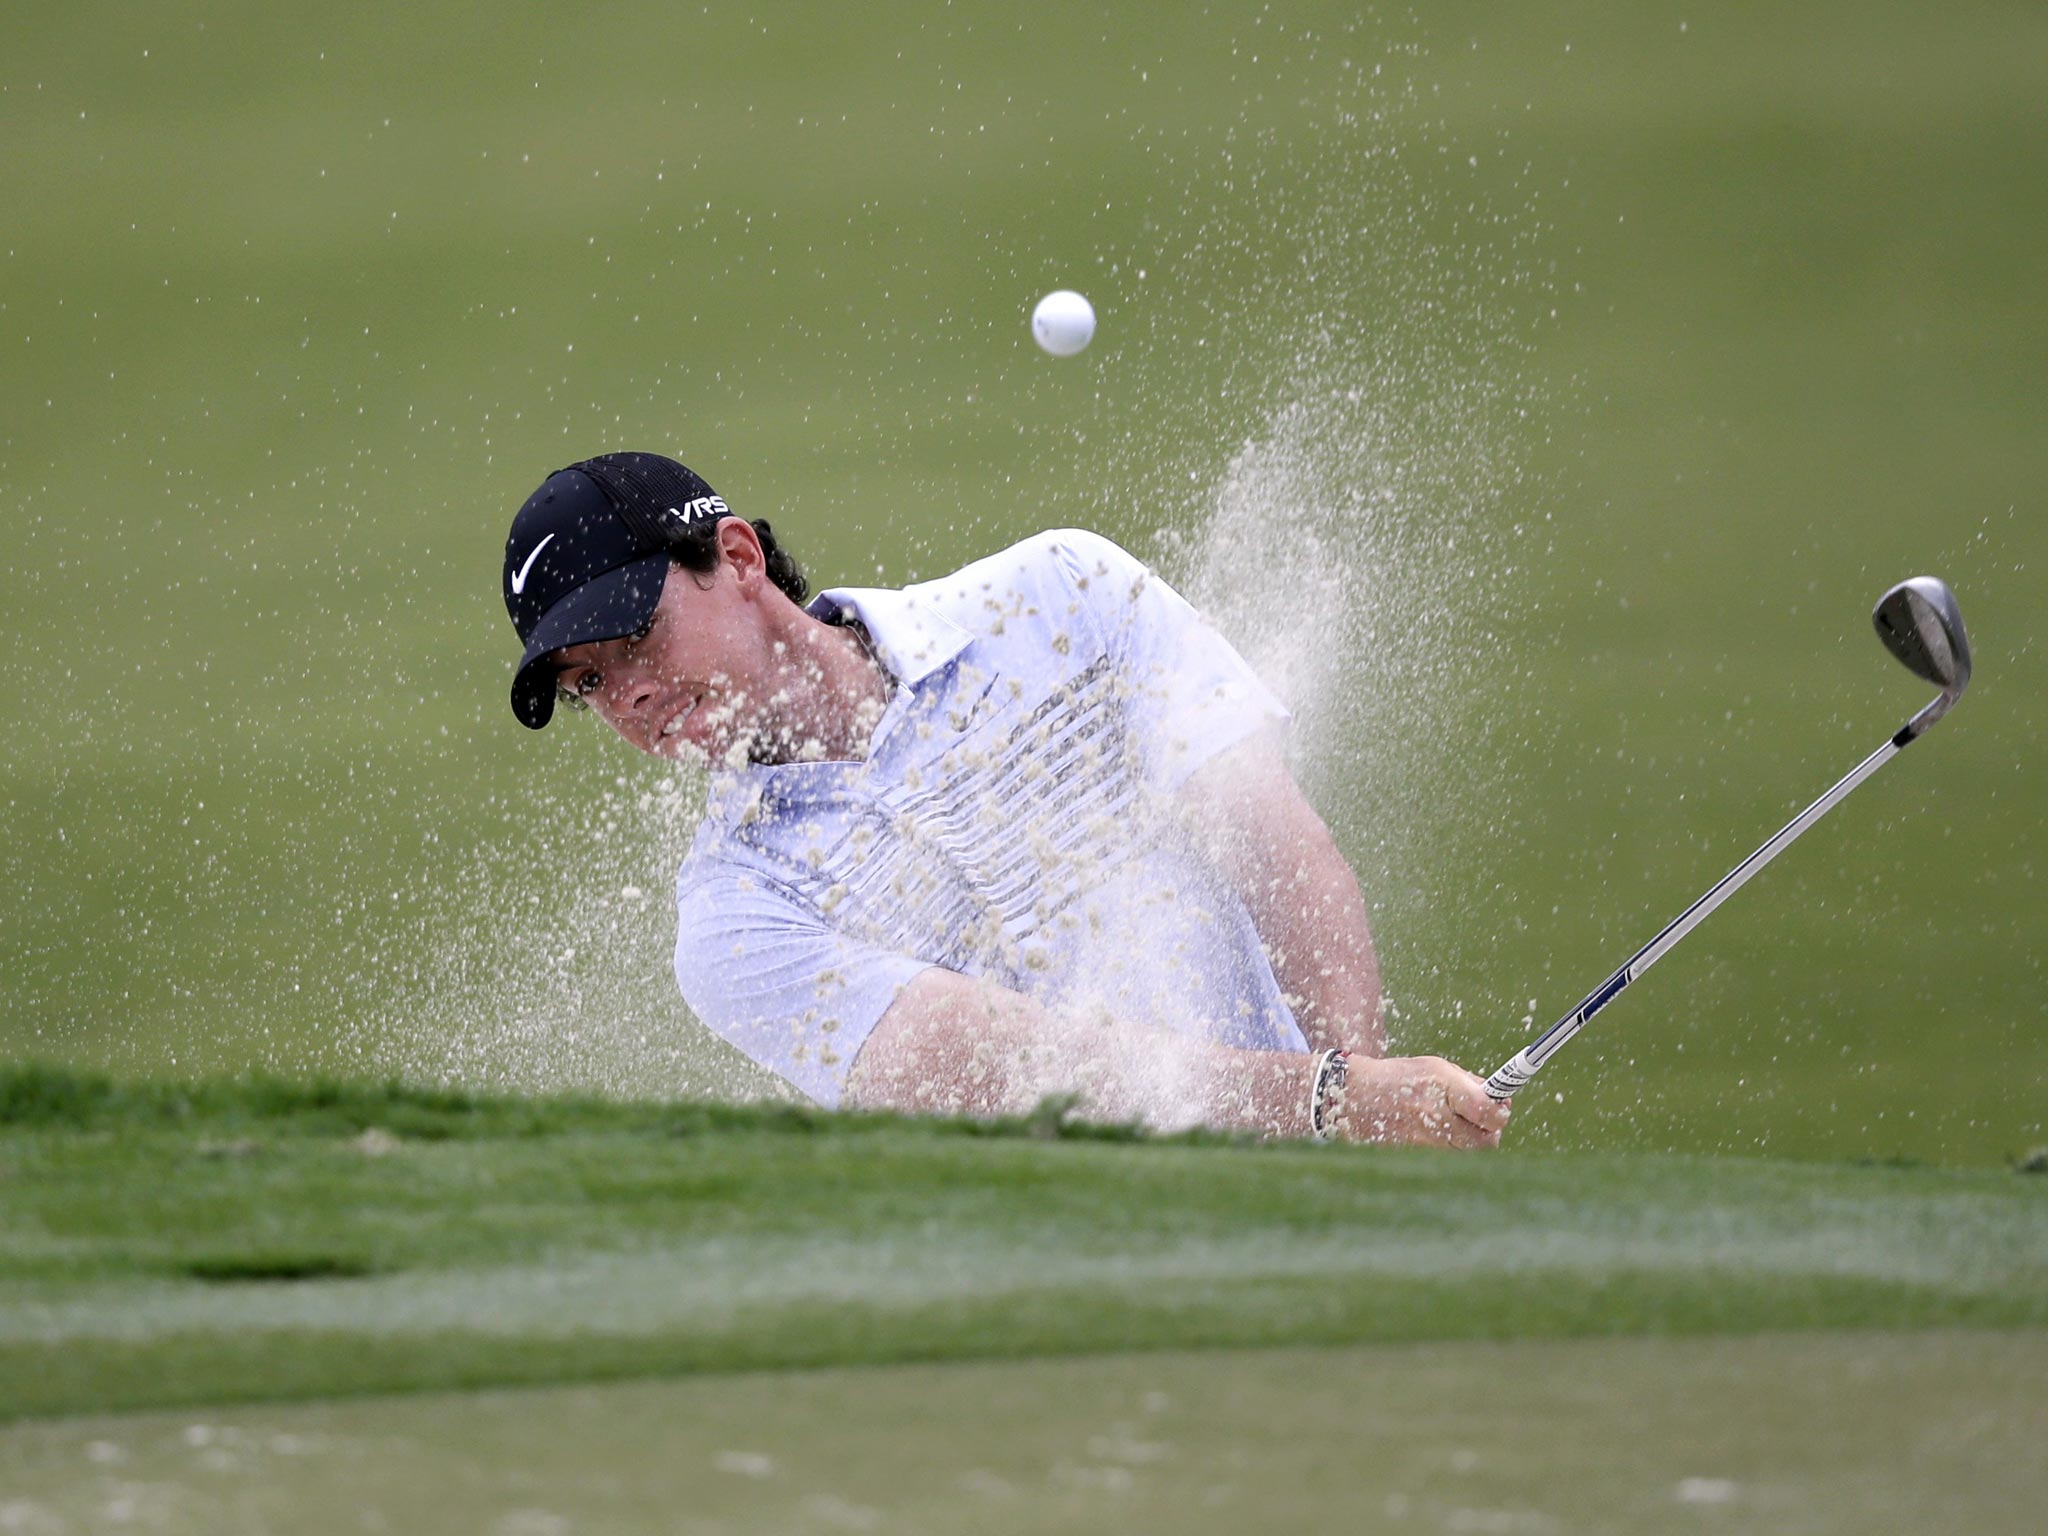 Rory McIlroy of Northern Ireland, hits from a 12th hole sand trap during the first round of the Cadillac Championship golf tournament